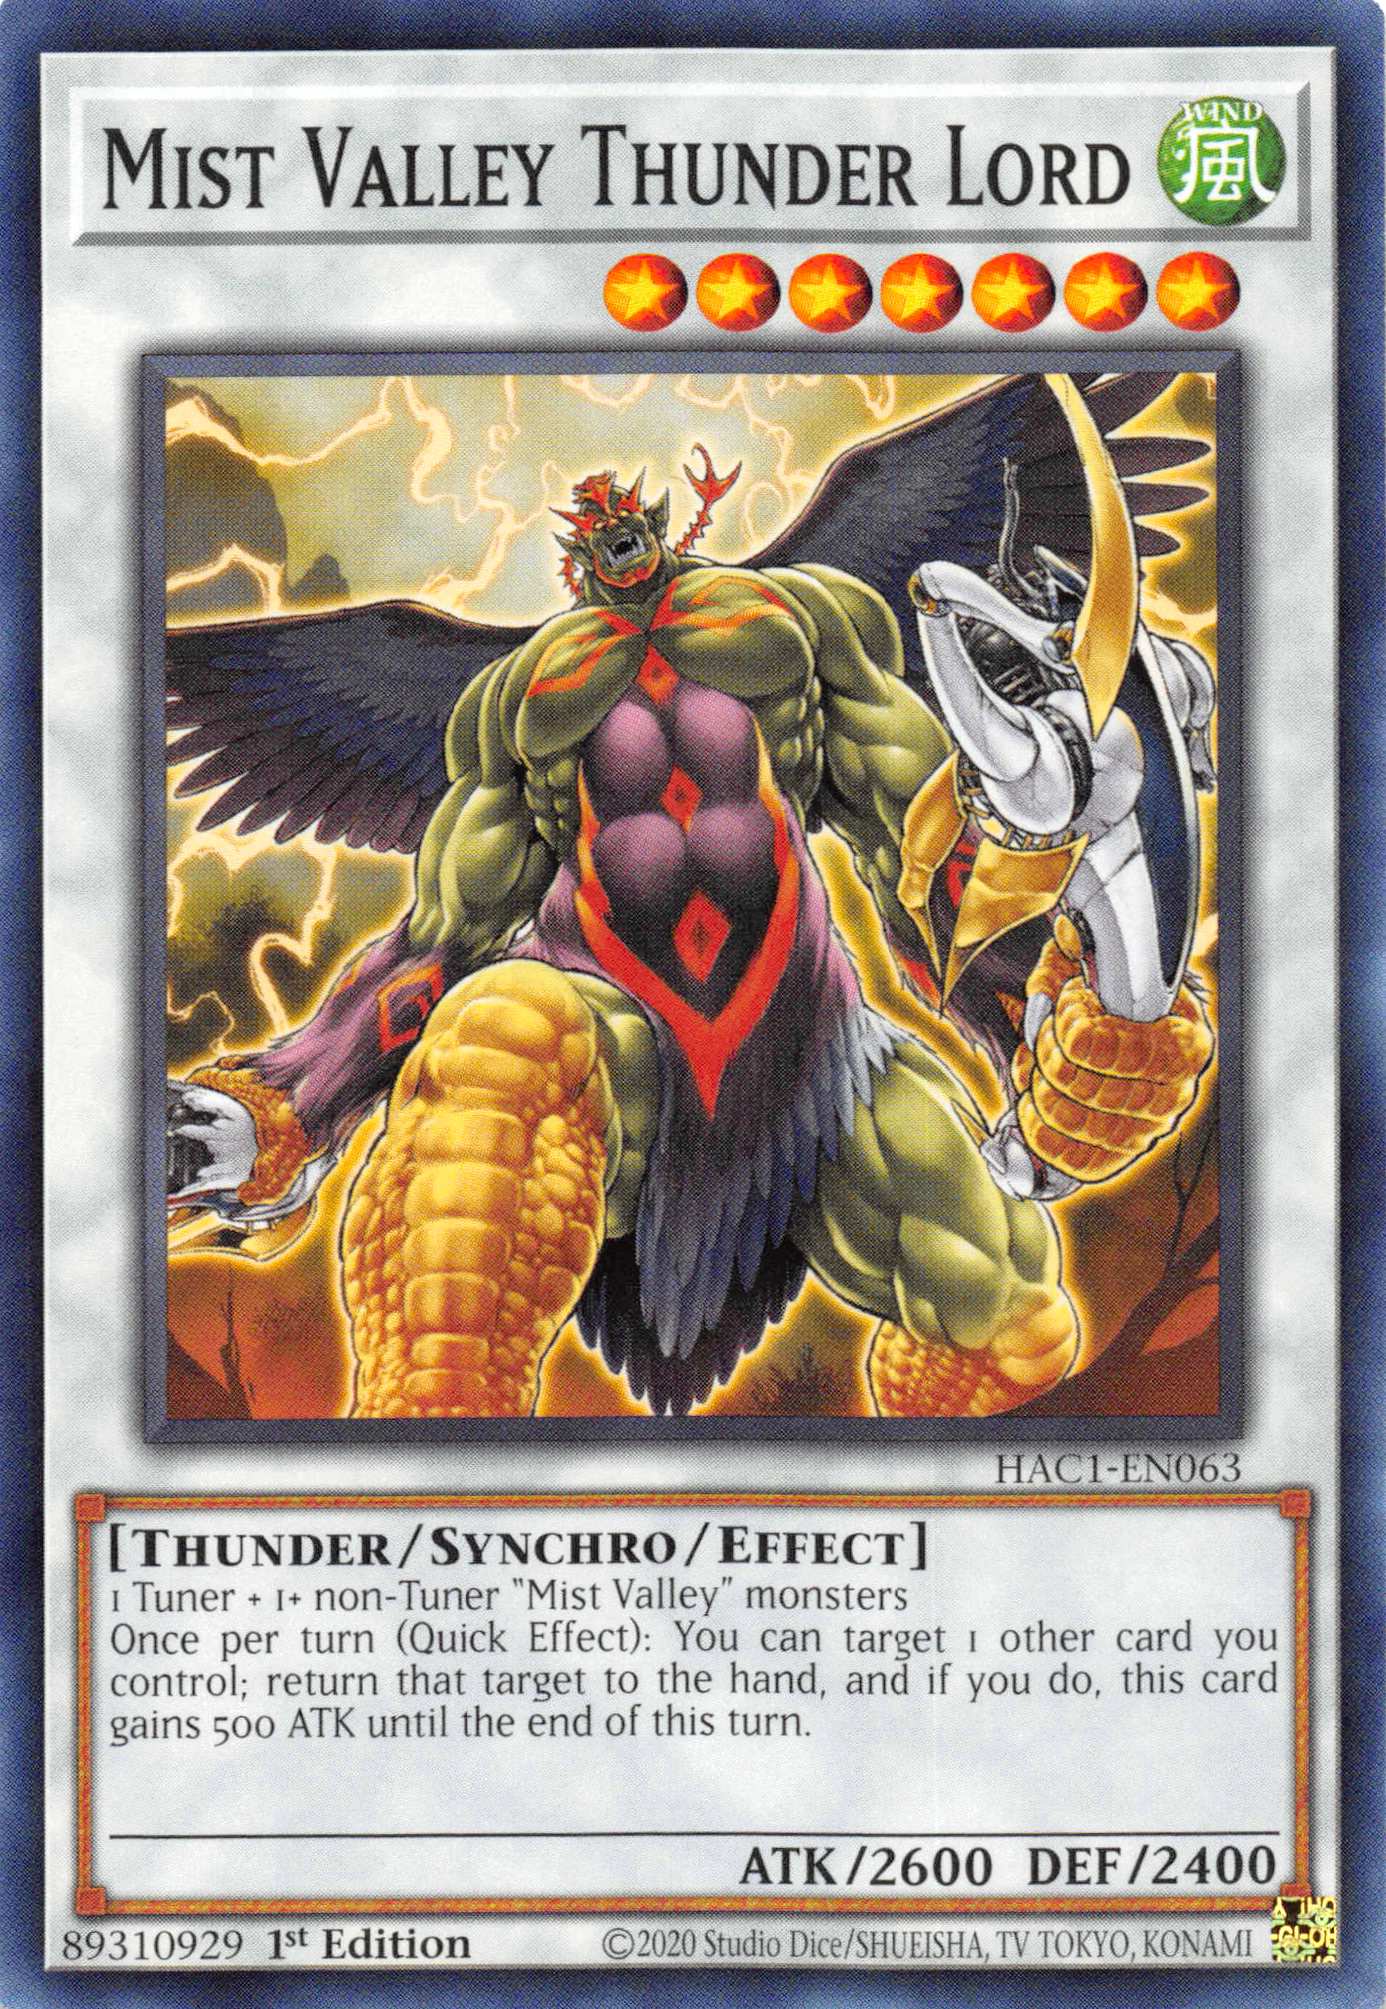 Mist Valley Thunder Lord [HAC1-EN063] Common - Duel Kingdom